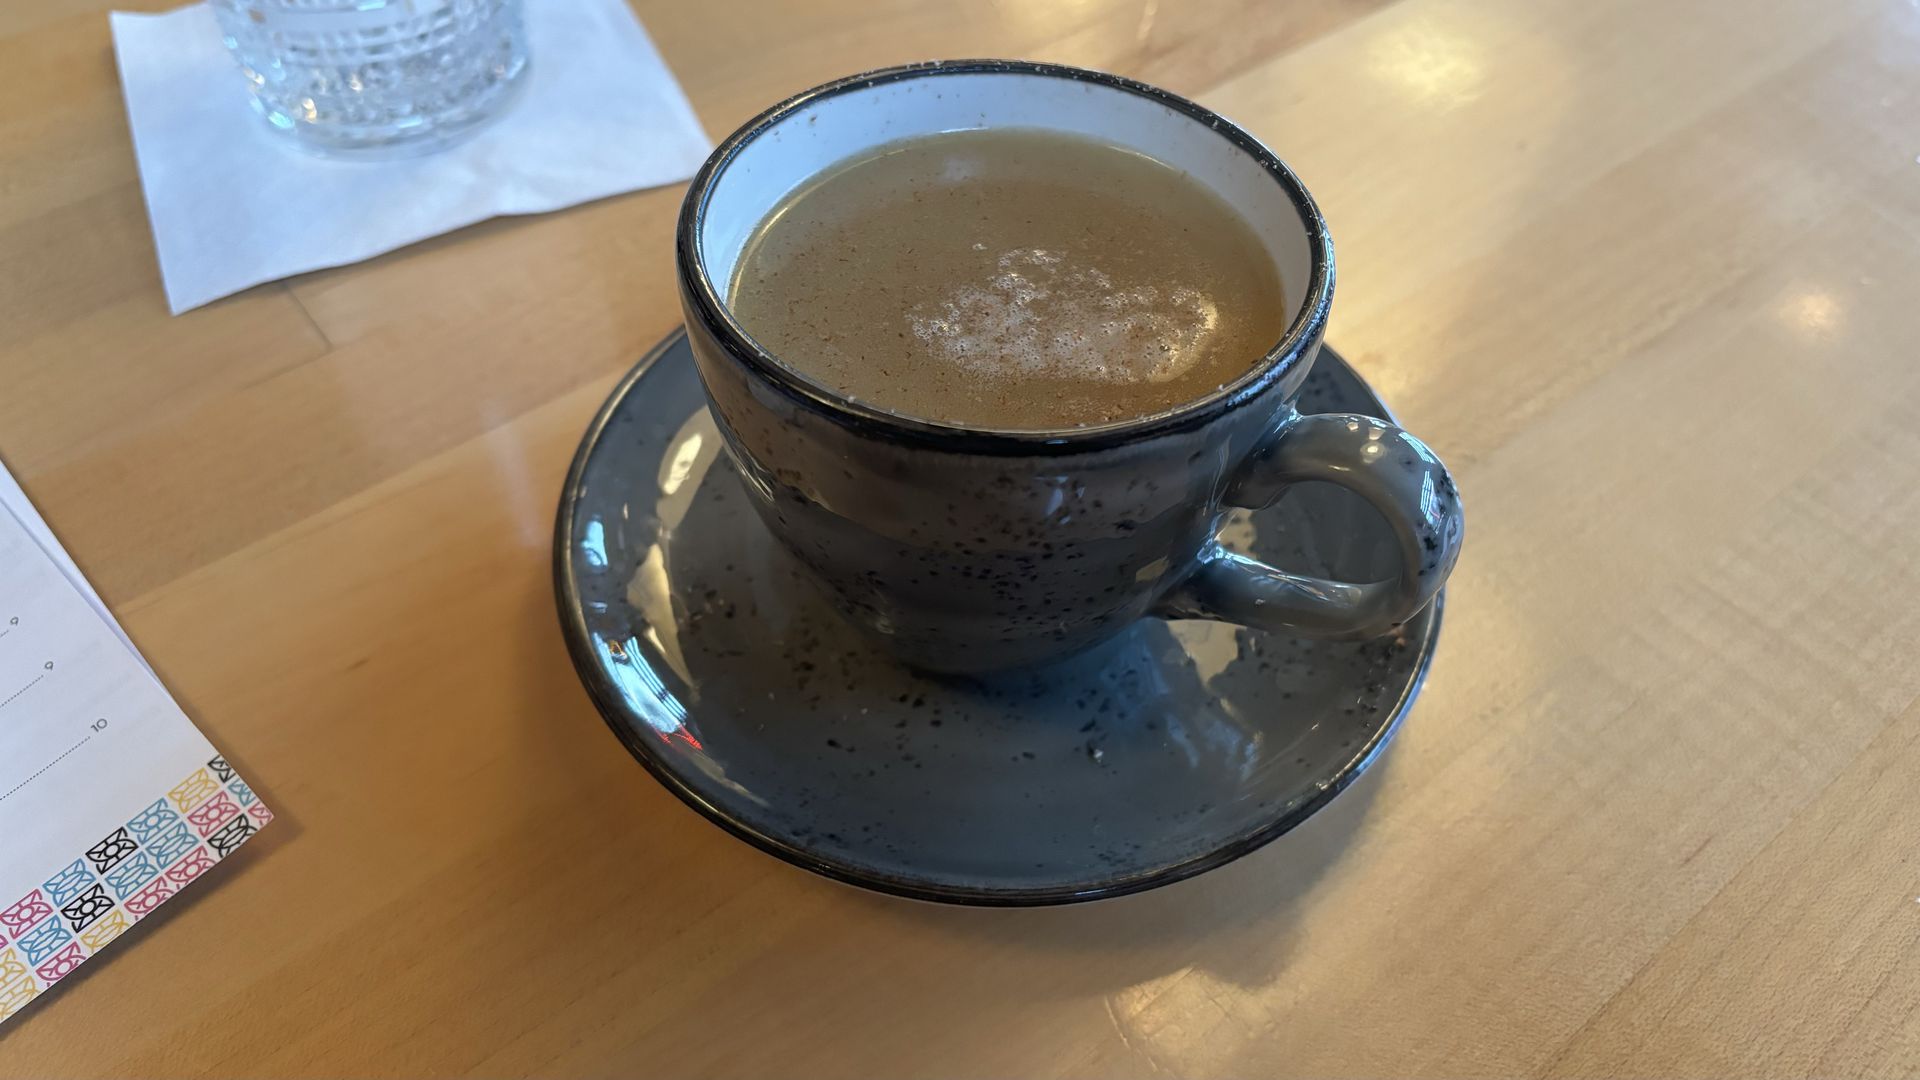 A drink on a wood counter with ceramic mug